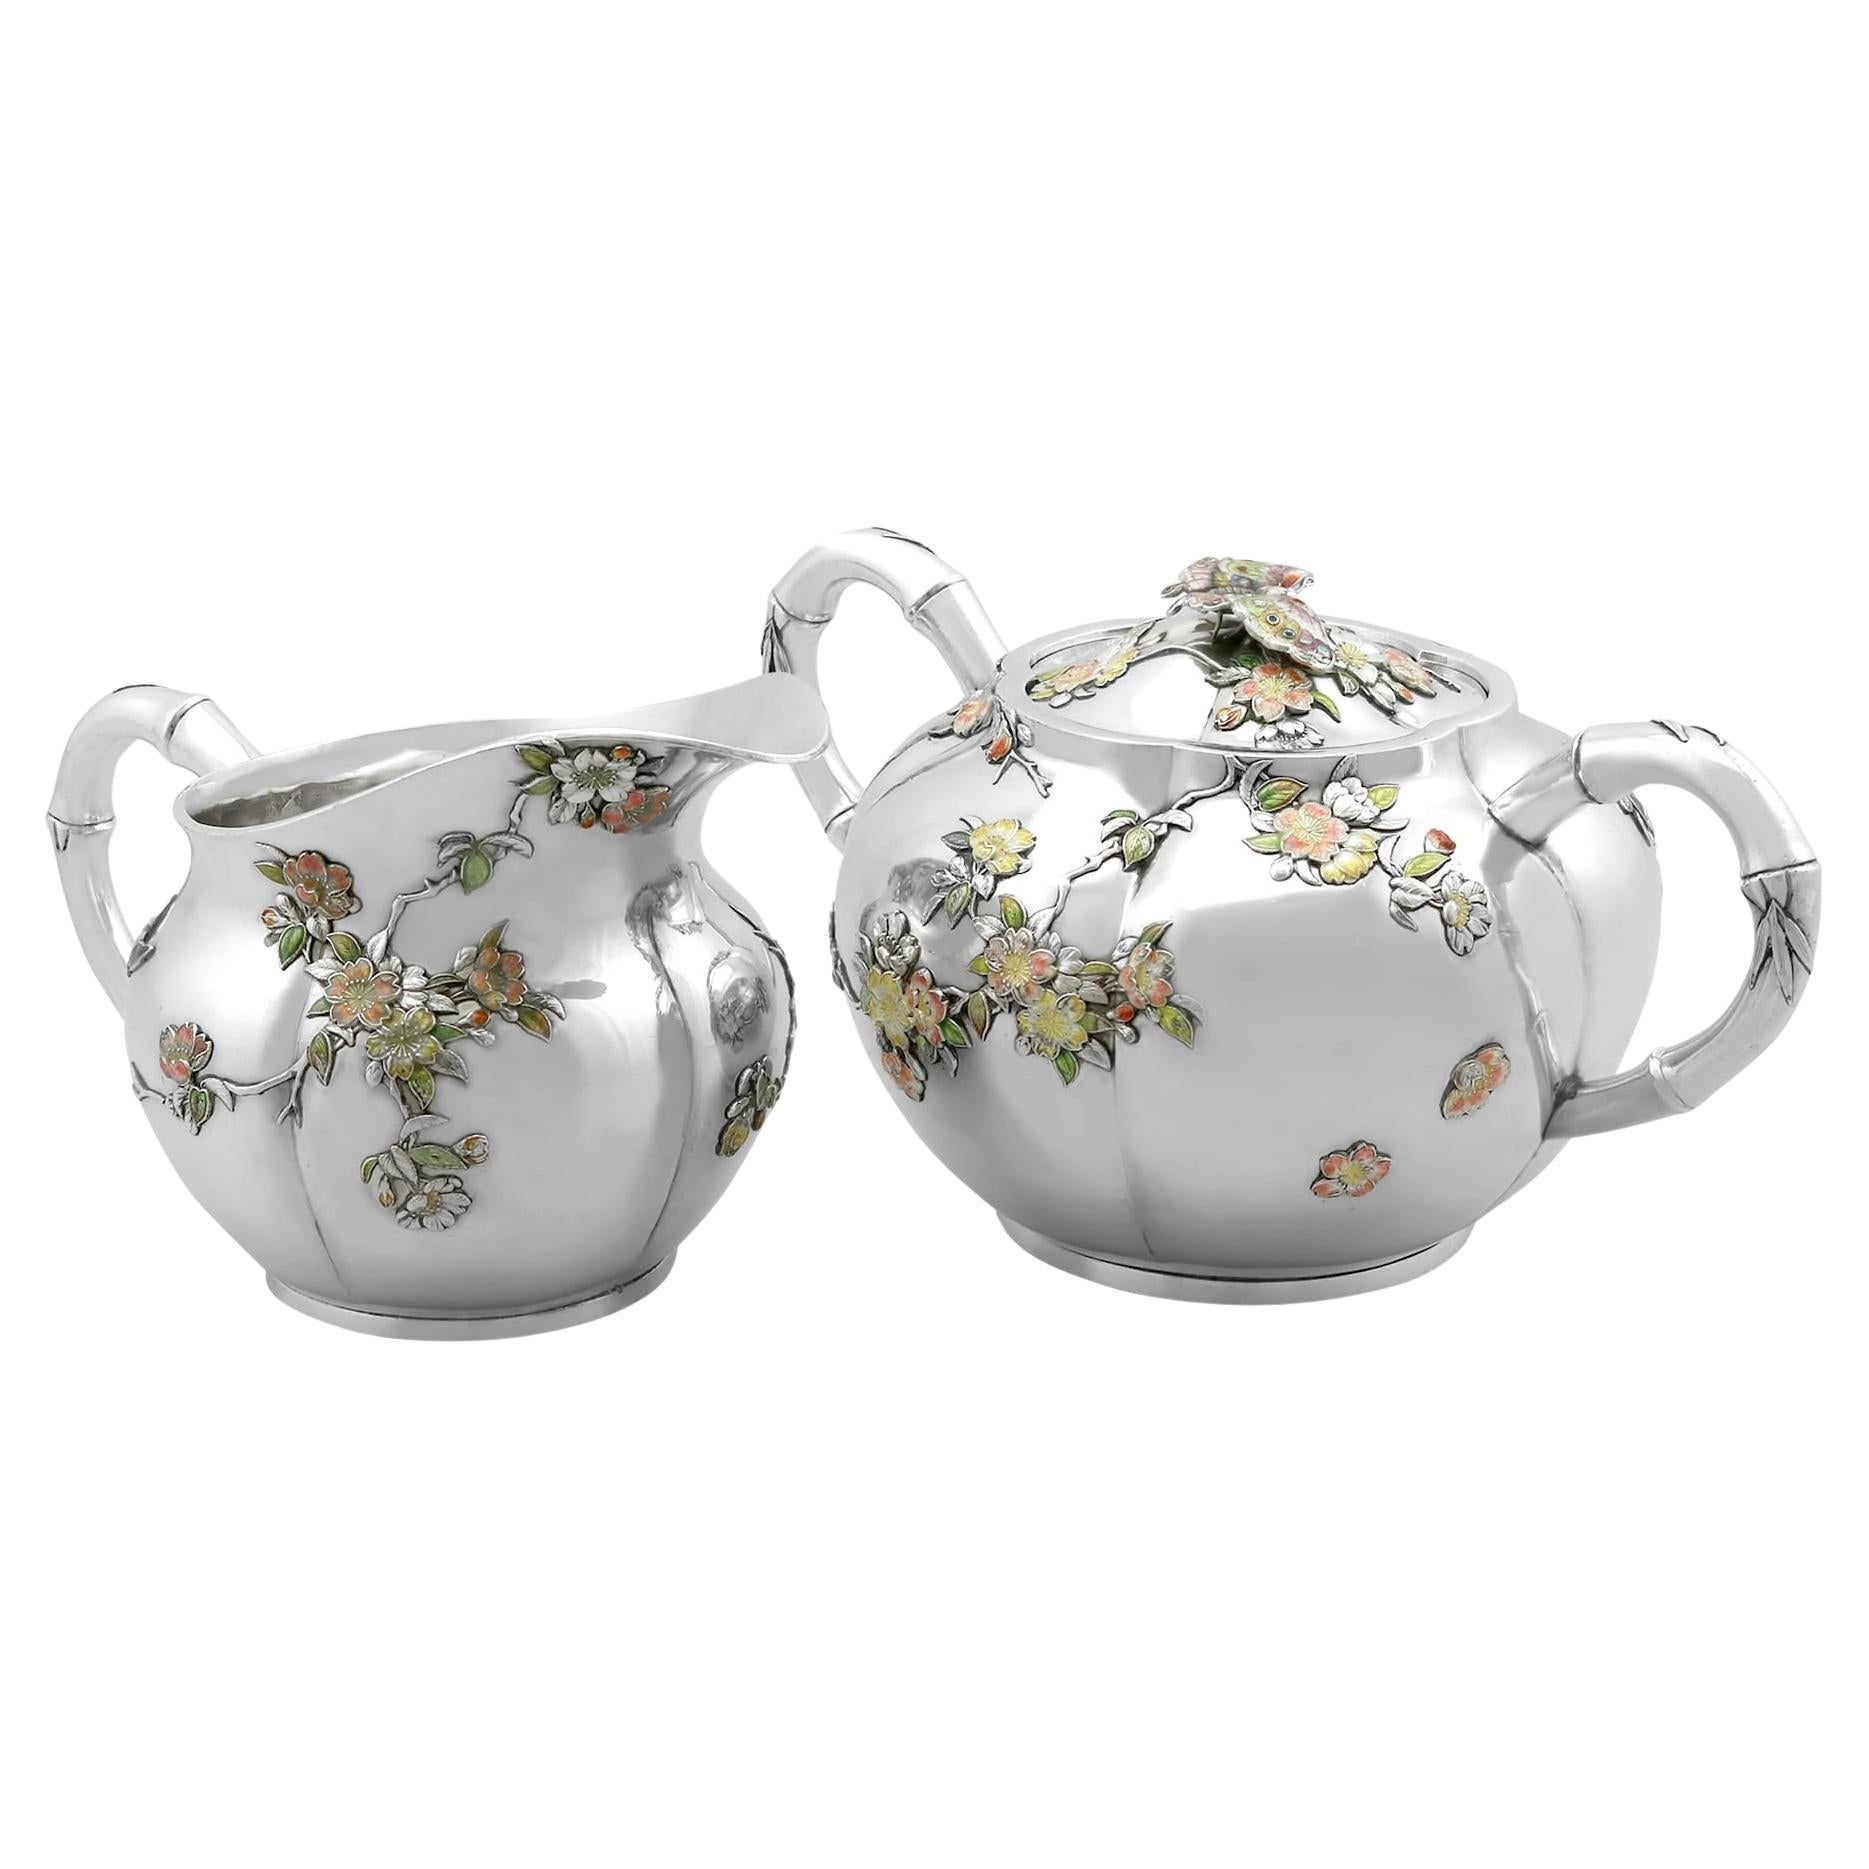 Antique Japanese Silver and Enamel Cream Jug and Sugar Bowl Circa 1890 For Sale